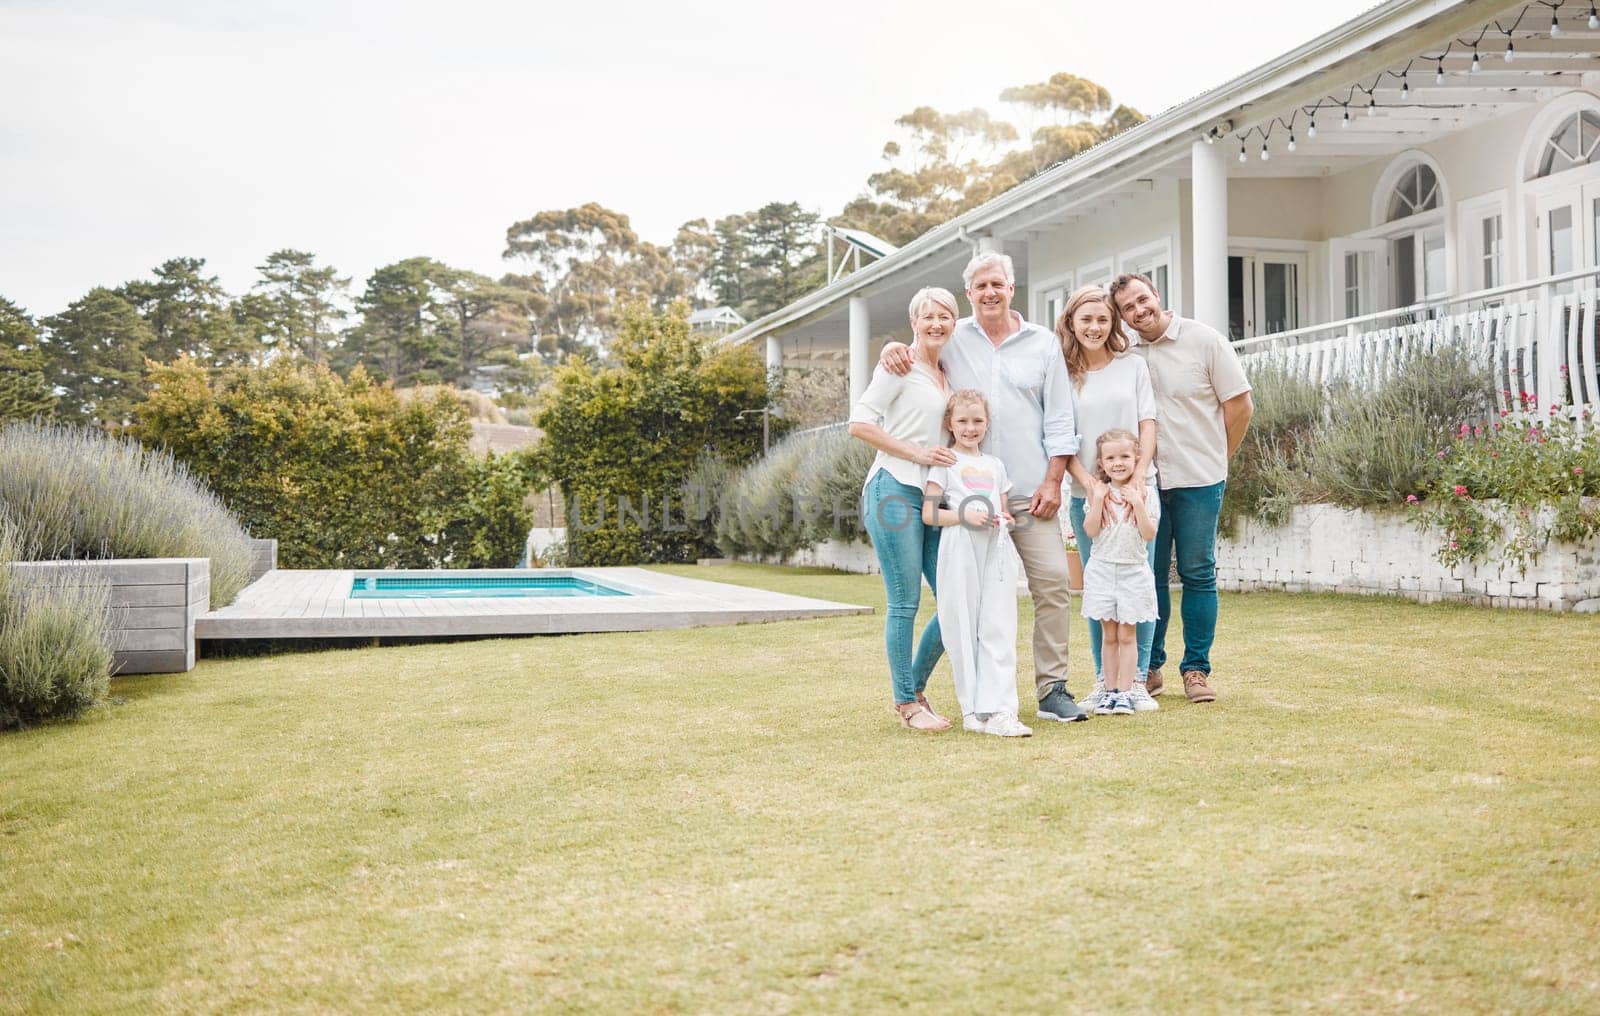 Portrait, real estate and a family in the garden of their new home together for a visit during summer. Children, parents and happy grandparents in the backyard for property investment with space by YuriArcurs